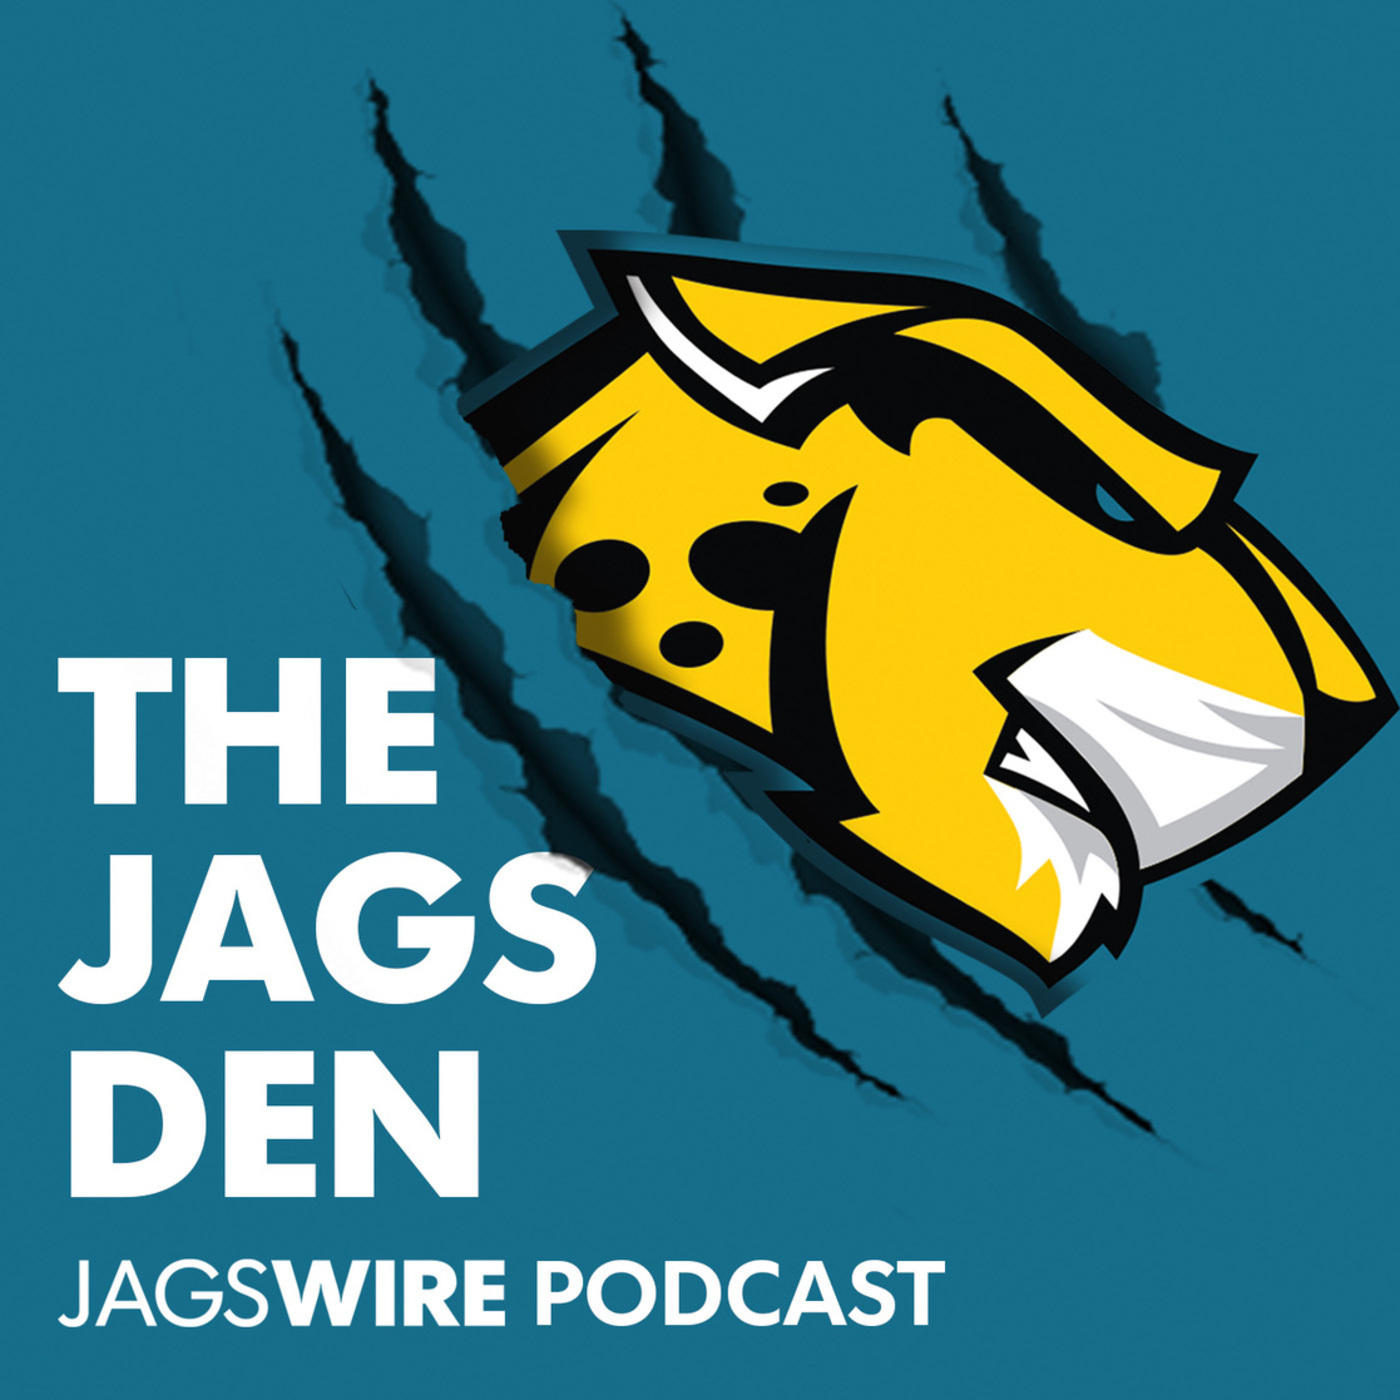 Jags Den Podcast Ep. 24: (Training camp edition) Discussions on Bortles' improvement, Fournette's new lean look, and offensive and defensive takeaways